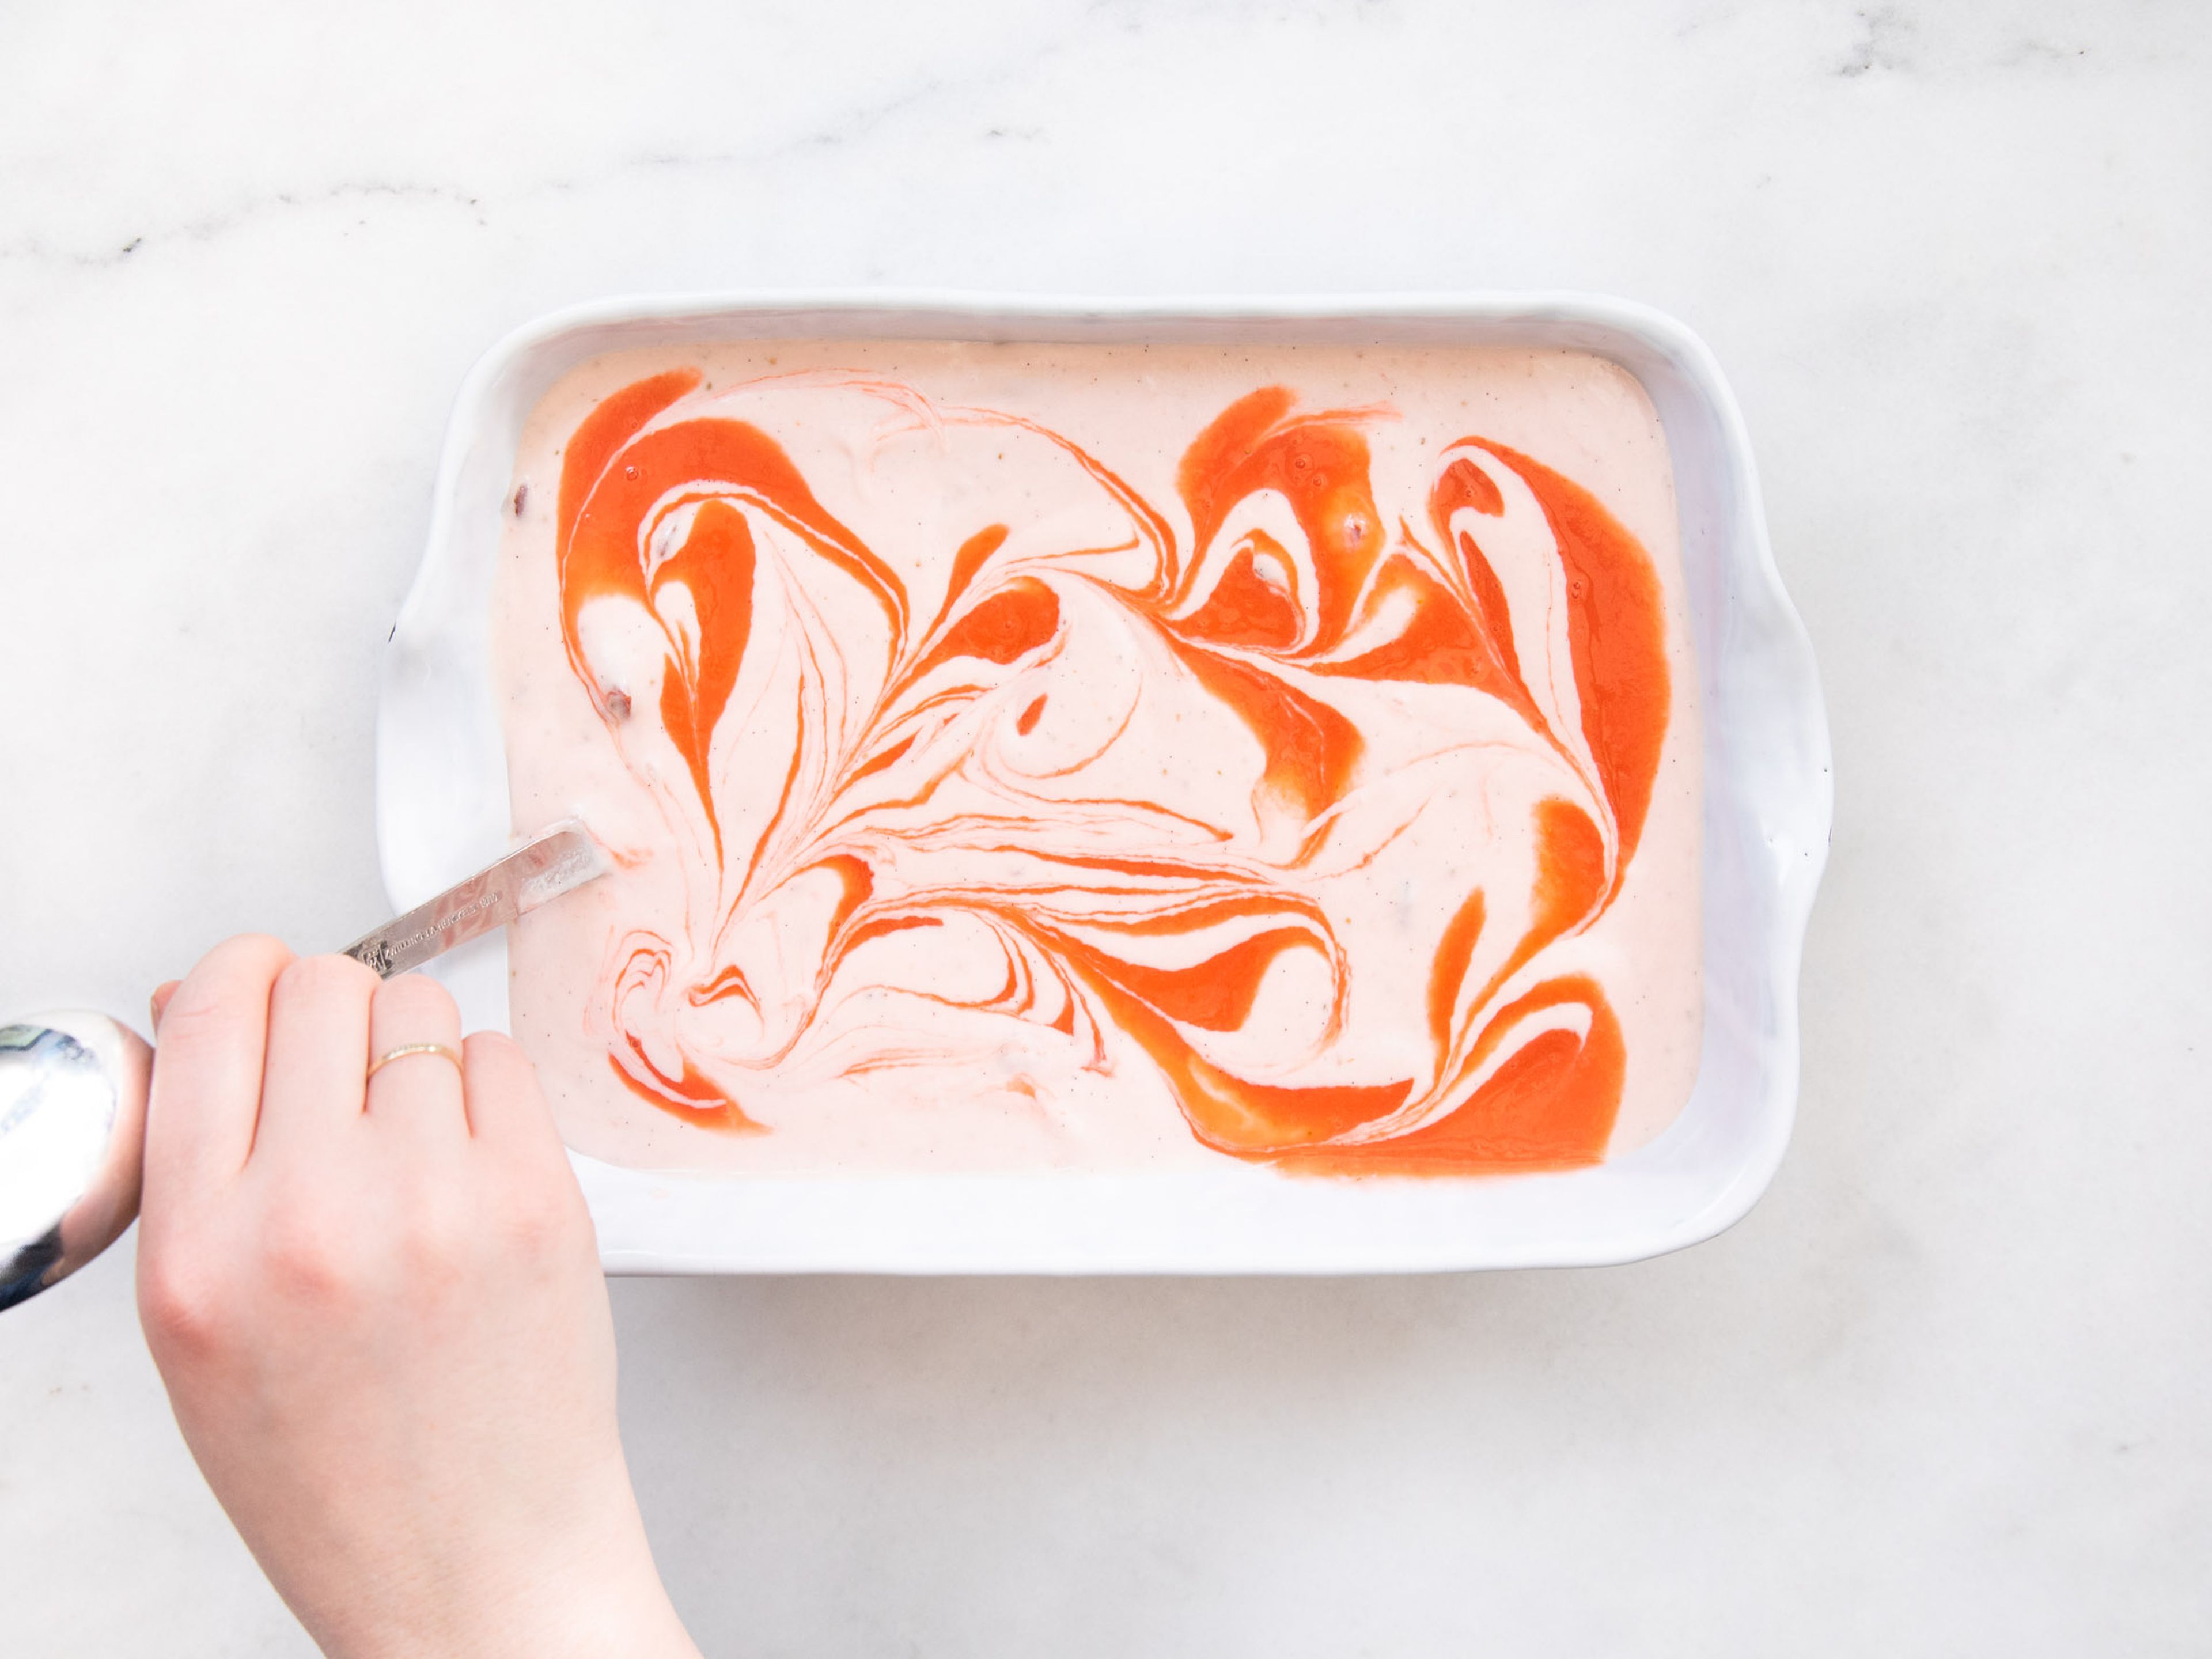 Pour ice cream mixture into a baking dish and pour the remaining purée over the top. Use the handle of a spoon to swirl purée into a marble pattern. Transfer to the freezer for approx. 3 hrs., or until frozen to your liking. Let mixture rest briefly at room temperature to soften before serving. Enjoy!